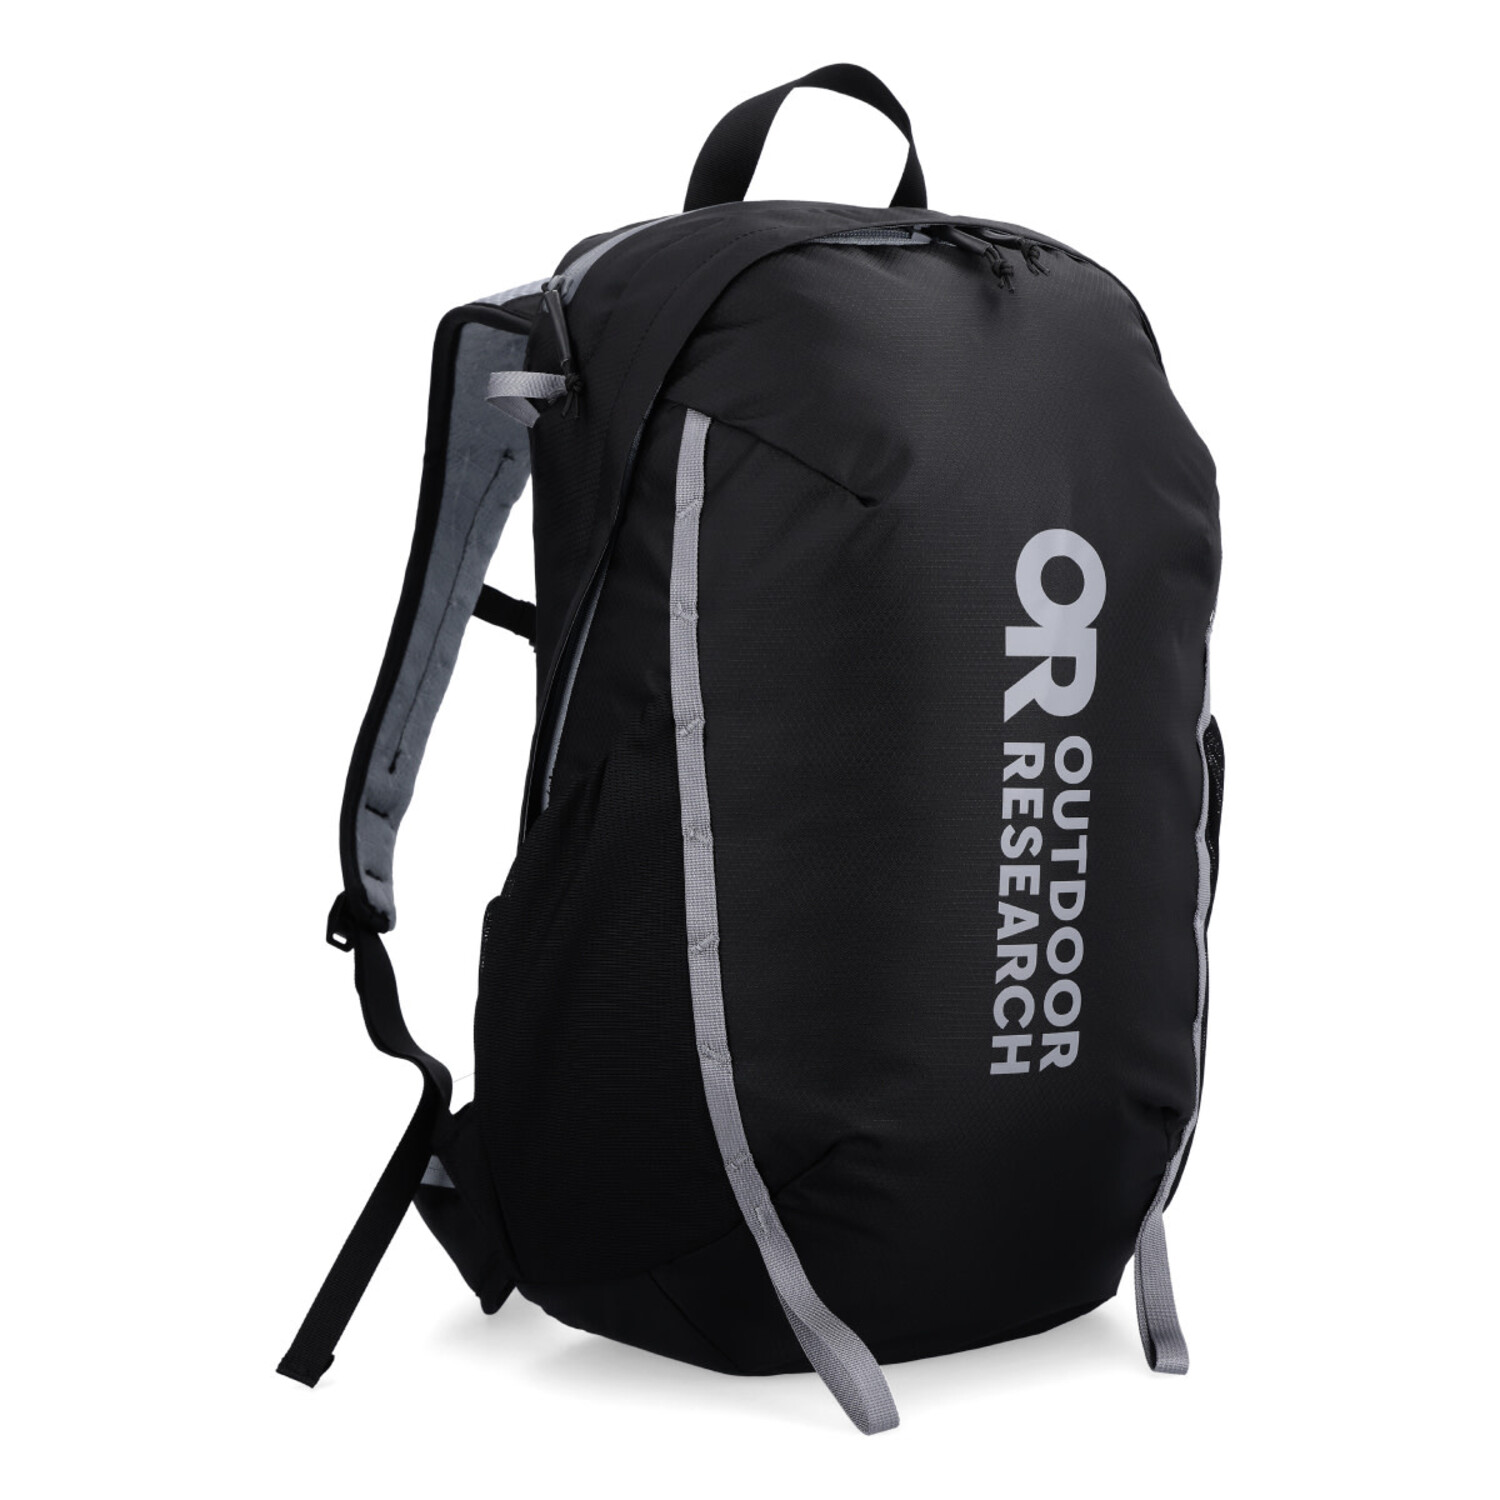 Outdoor Research Adrenaline Day Pack 30L - True Outdoors